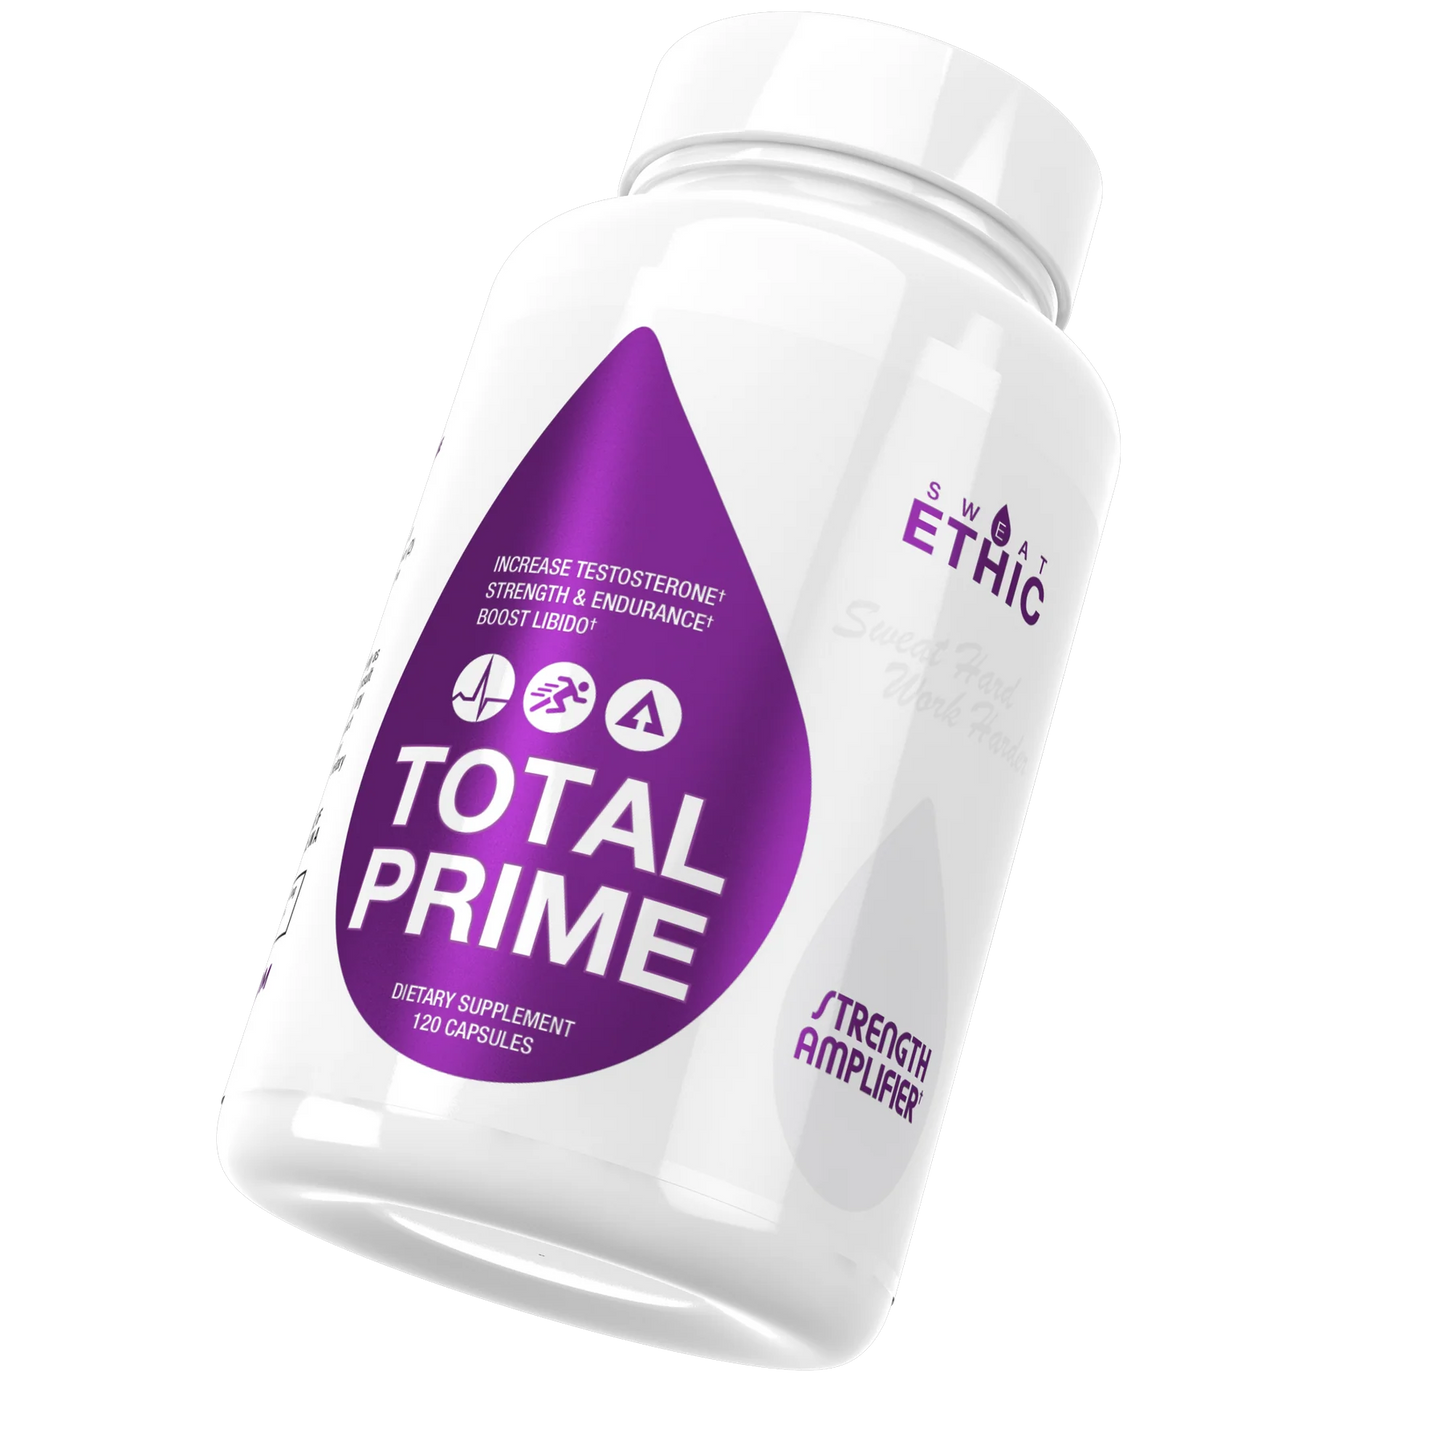 TOTAL PRIME (Strength Amplifier and Testosterone)